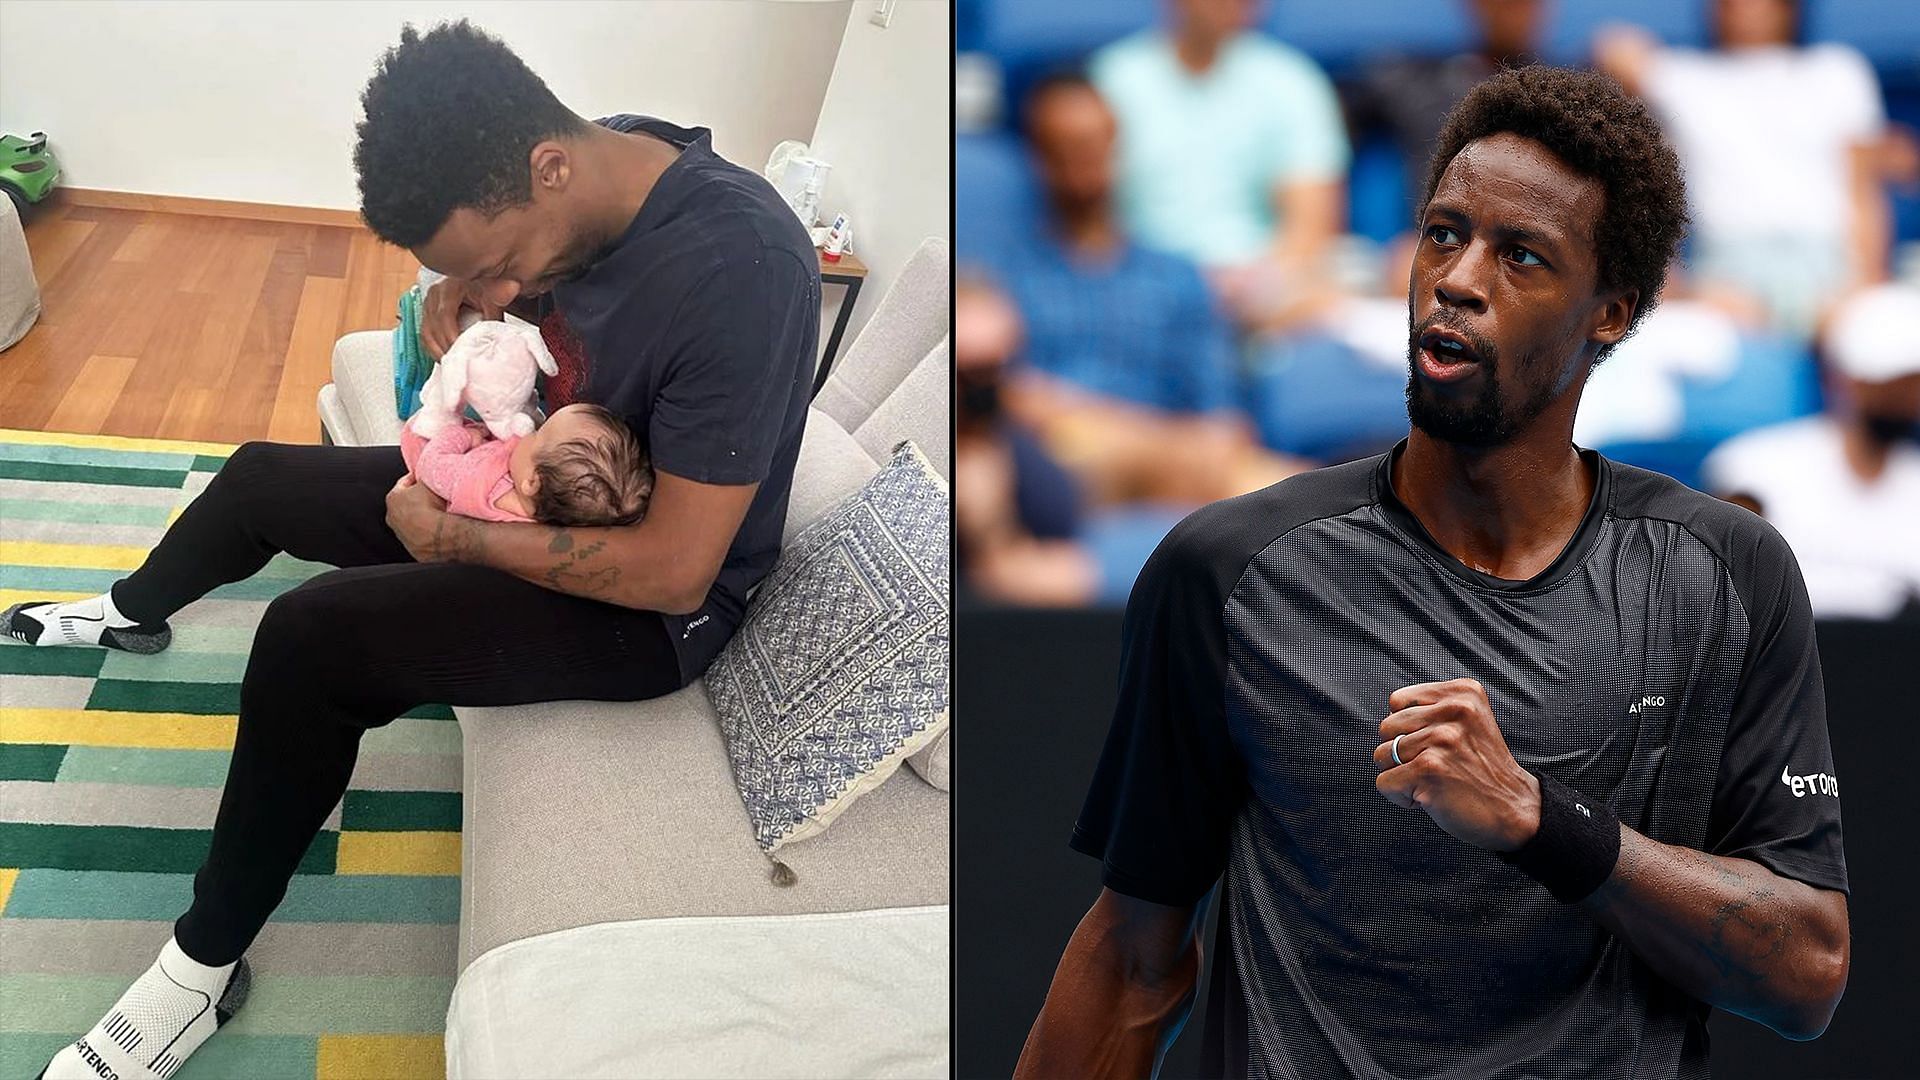 Gael Monfils used his daughter as motivation to defeat Sebastian Baez at the 2023 French open.